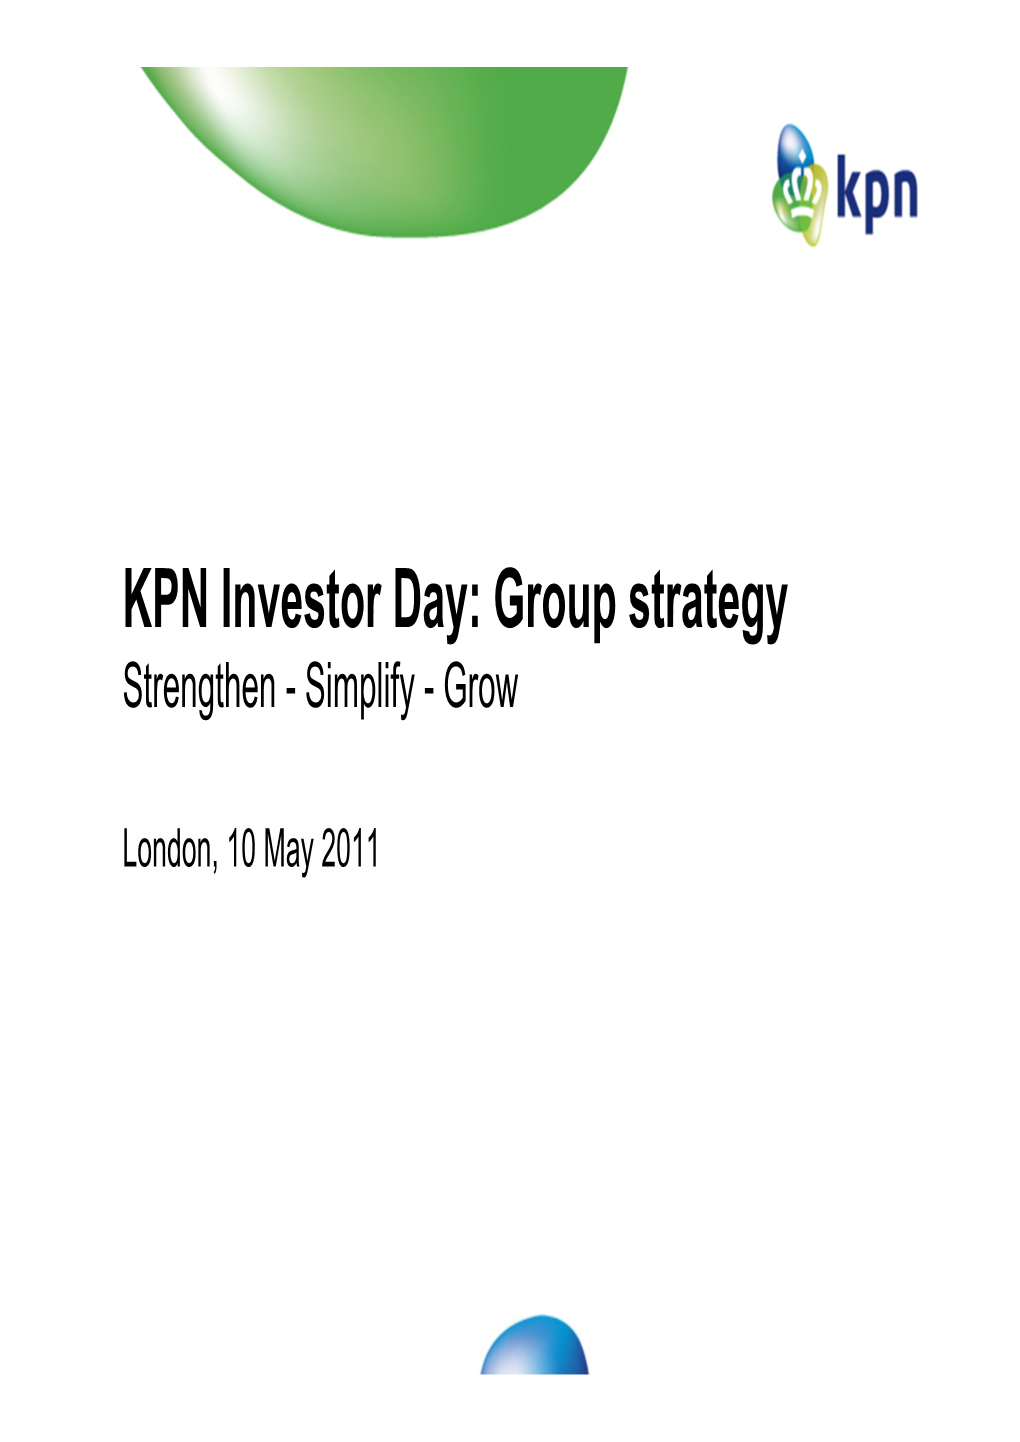 KPN Investor Day: Group Strategy Strengthen - Simplify - Grow